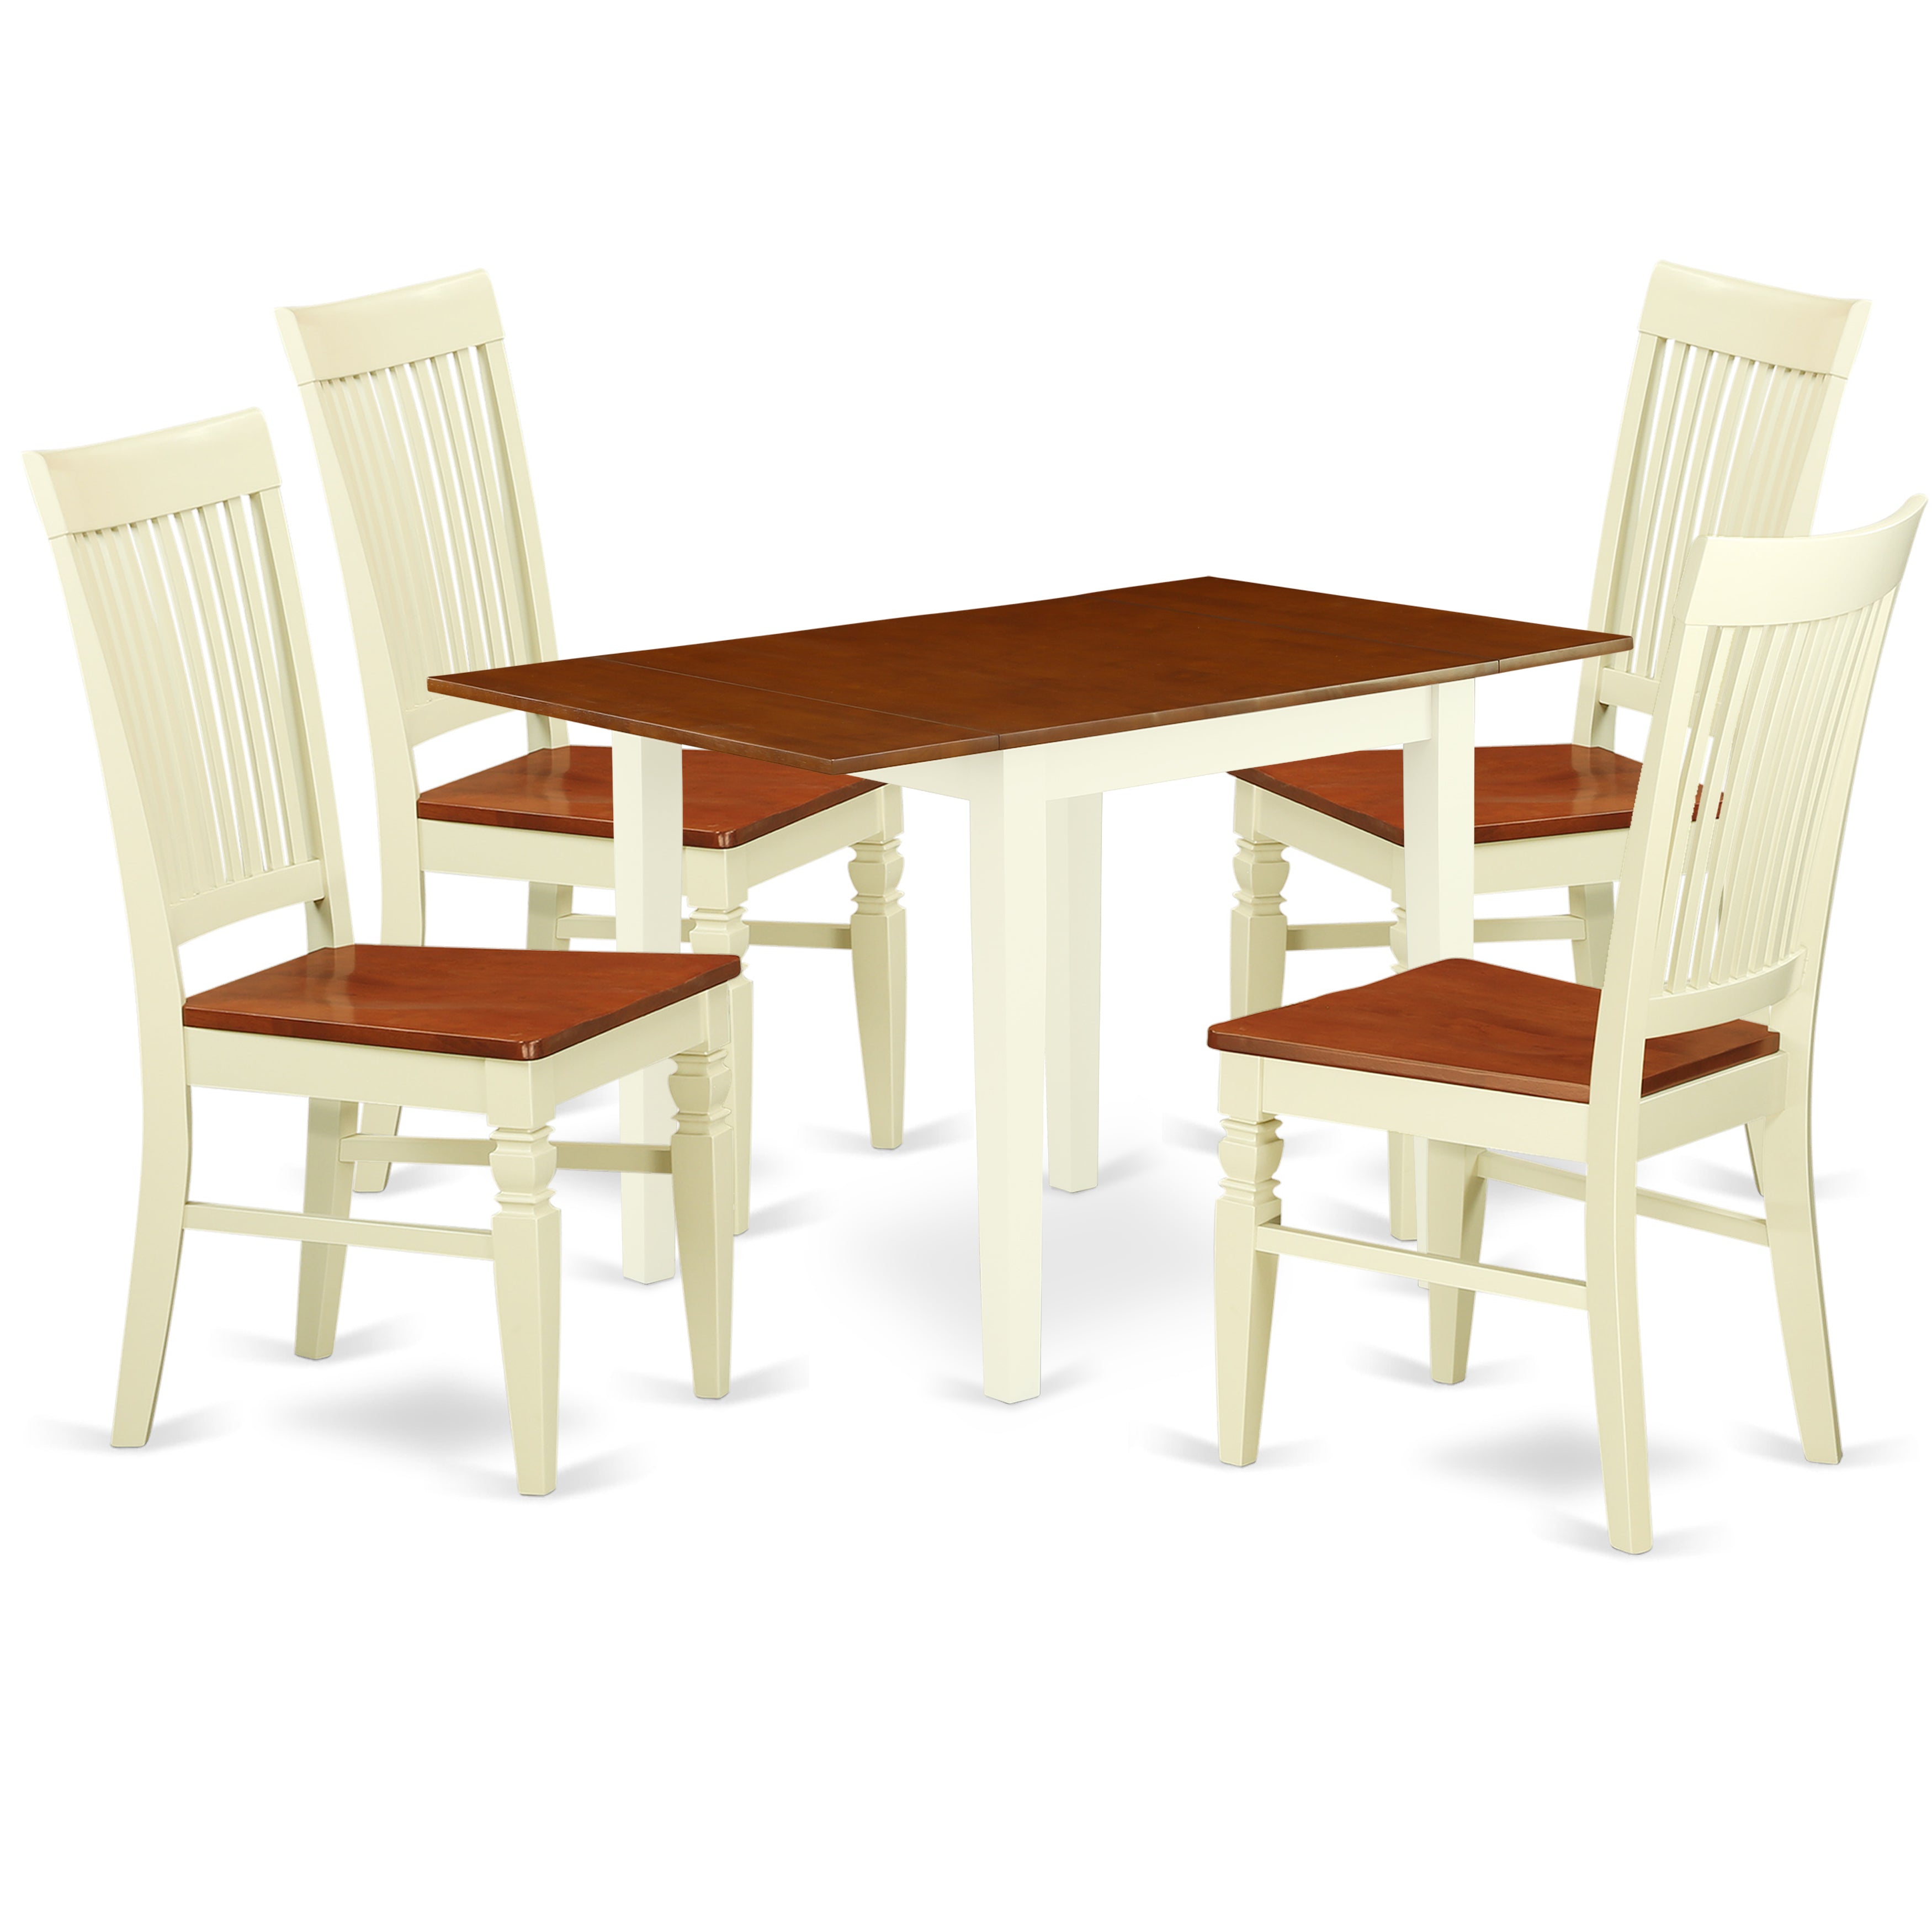 East West Furniture NDWE5-WHI-W, 5Pc Dinette Set for Small Spaces Includes a Wood Dining Table and 4 Wooden Dining Chairs with Solid Wood Seat and Slat Back, Buttermilk and Cherry Finish